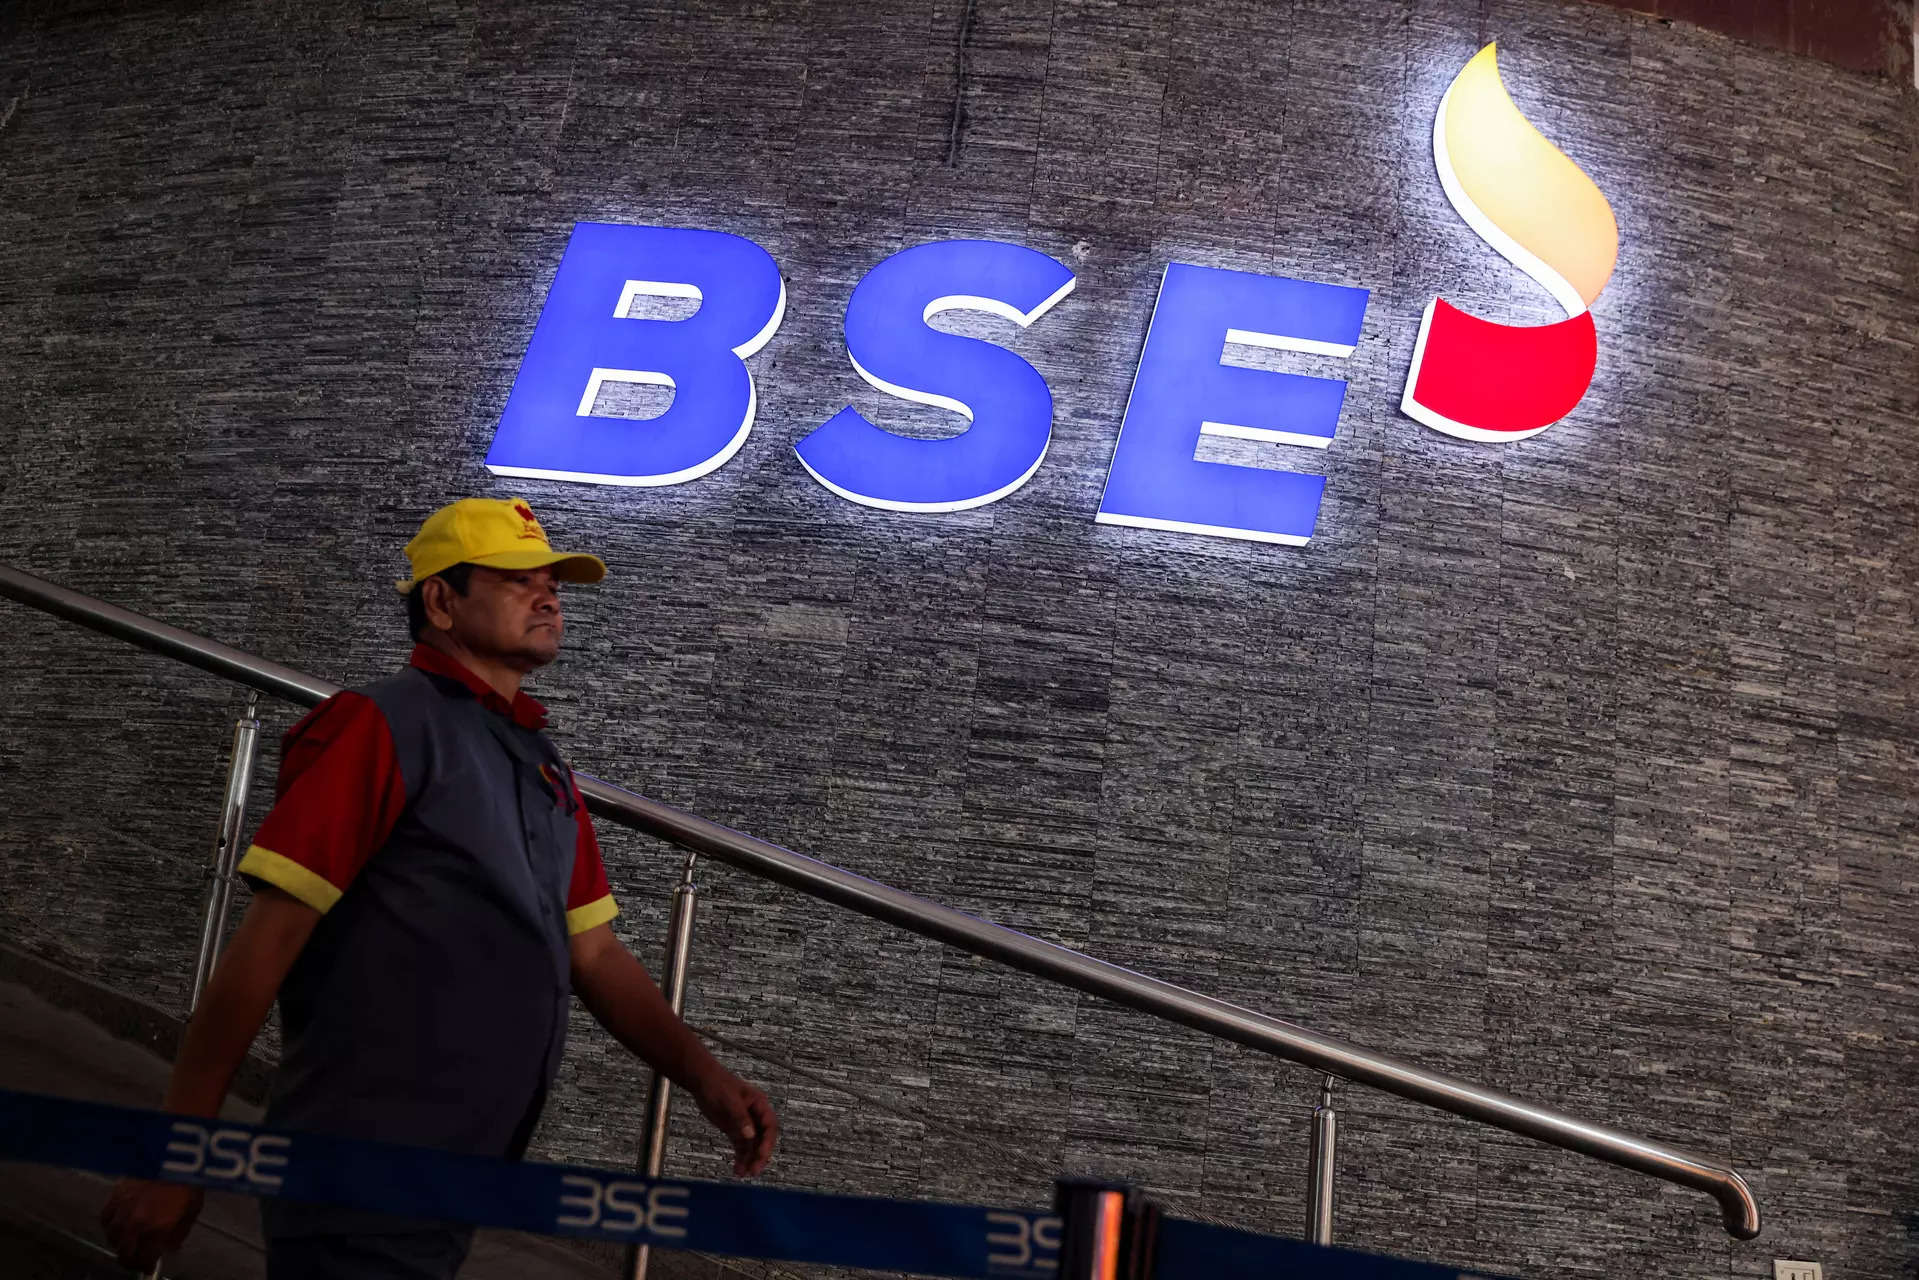 BSE shares tumble 19% on regulatory setback; Jefferies downgrades to hold 